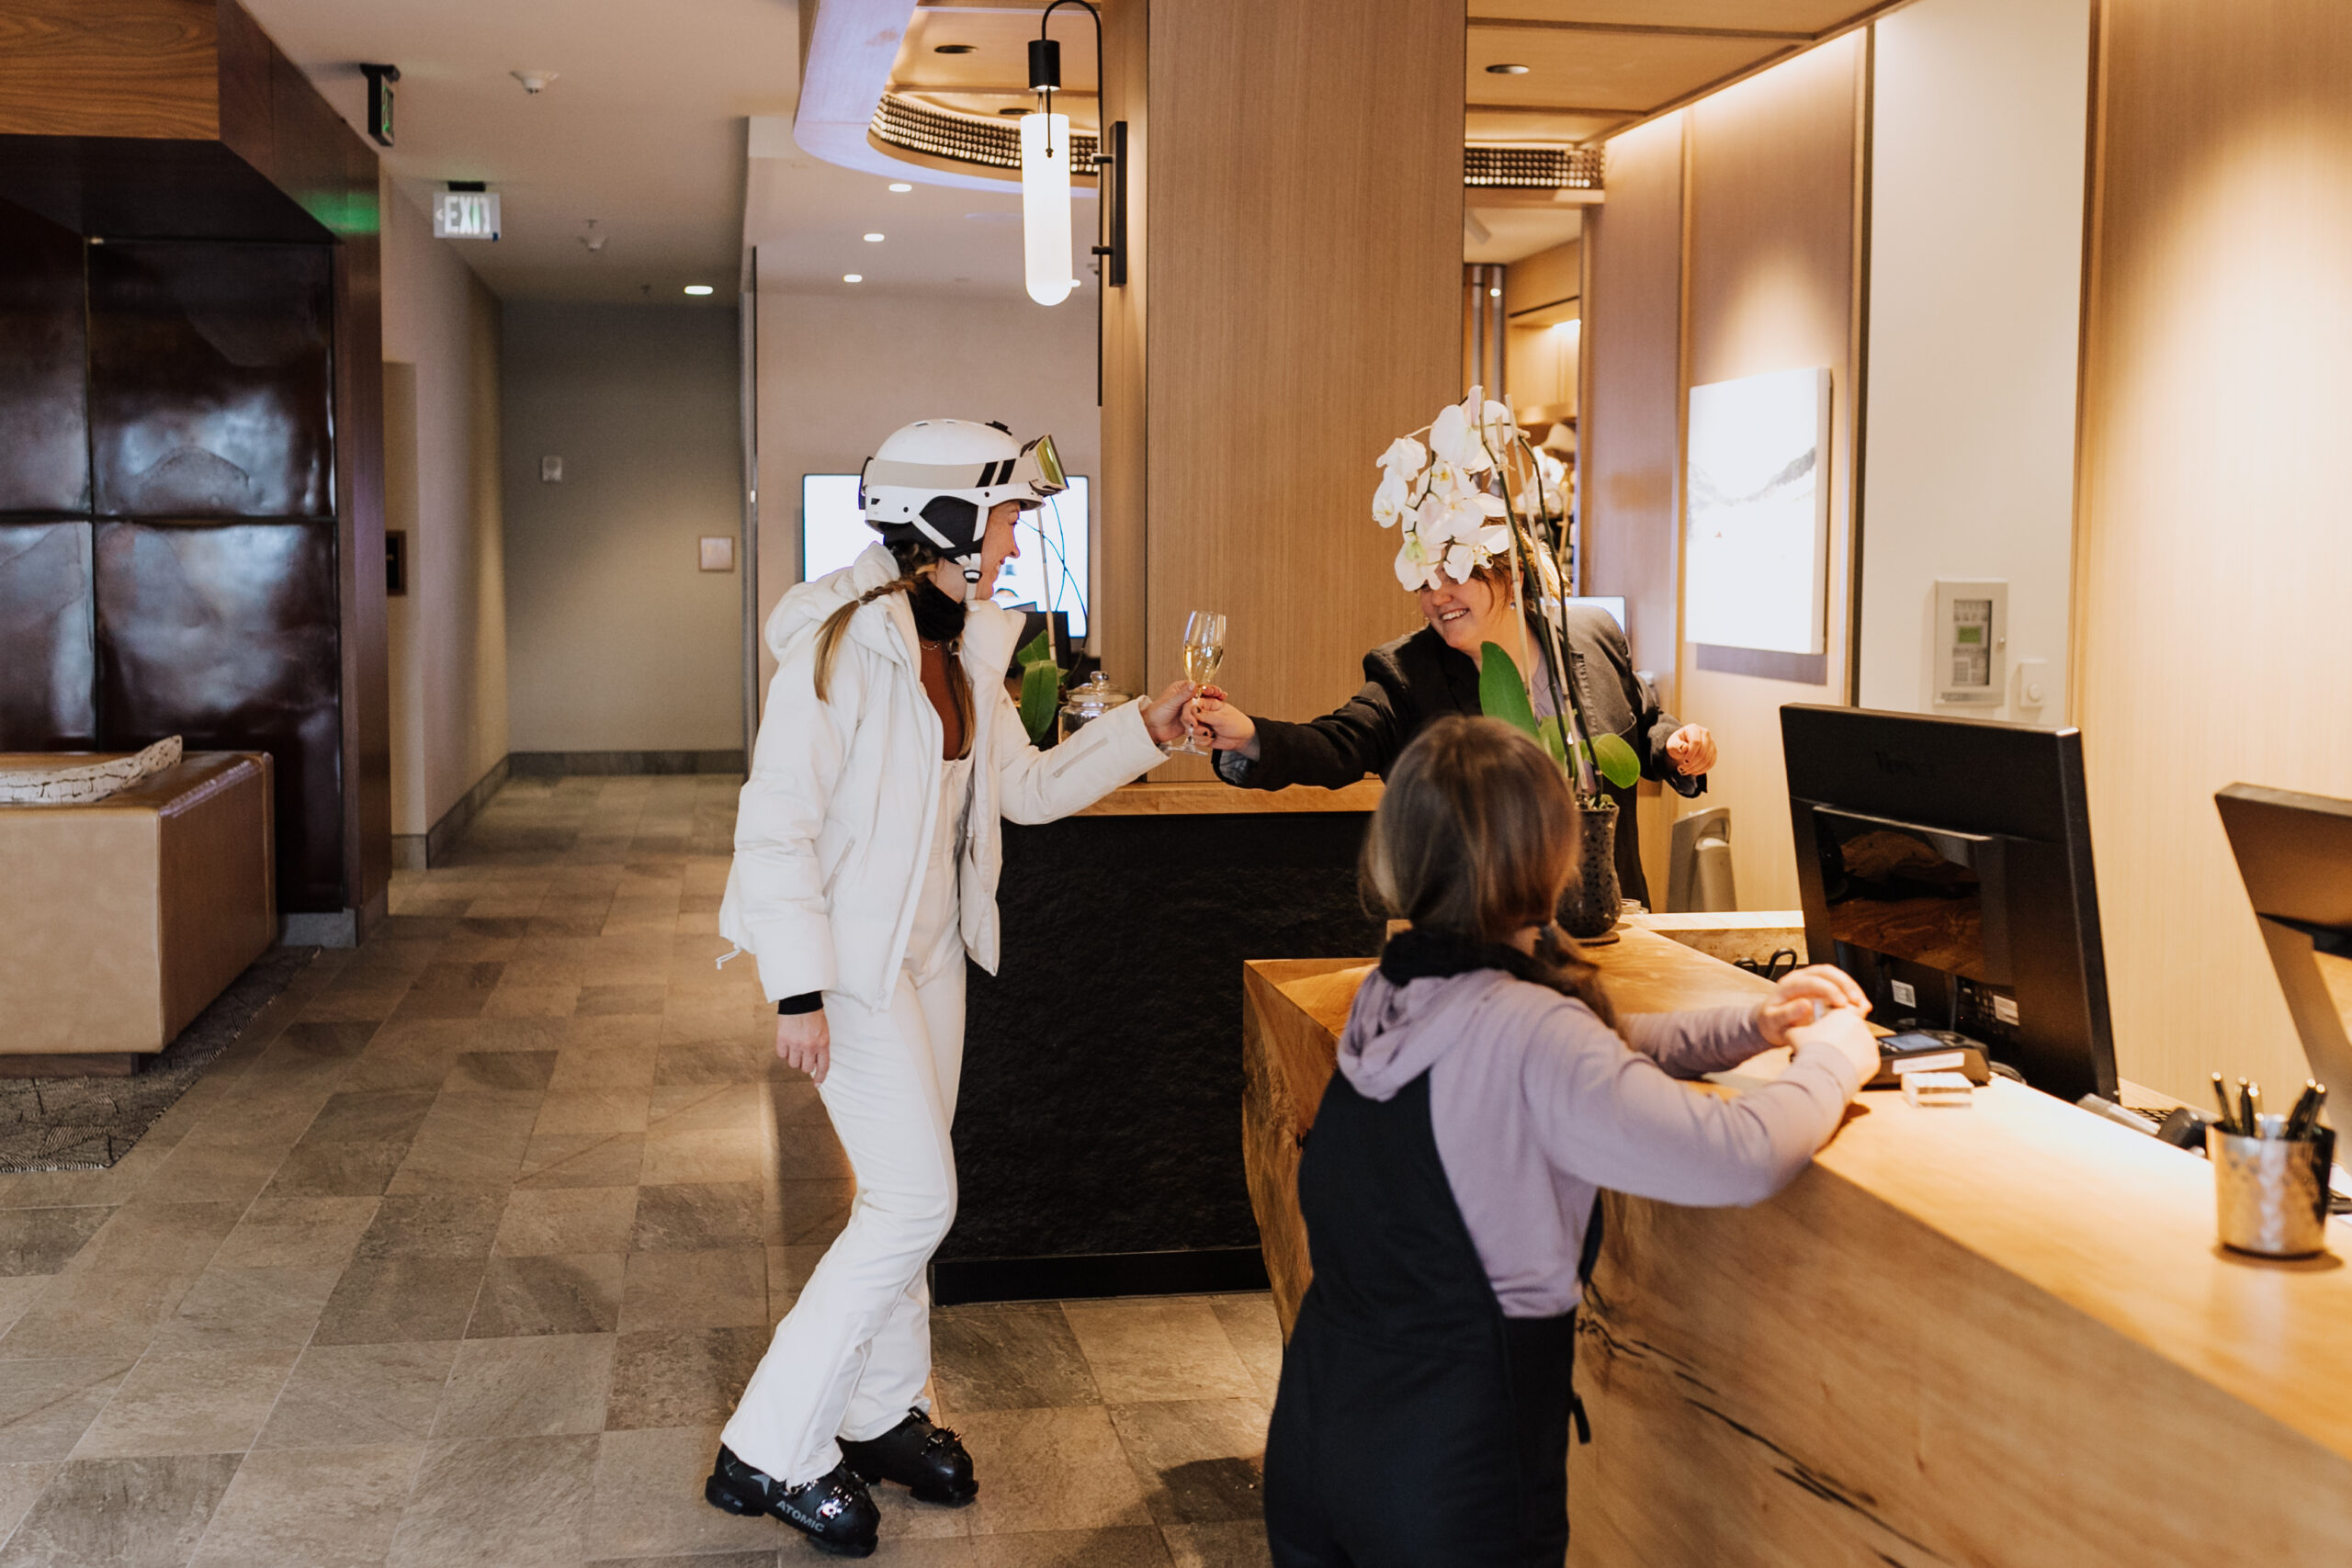 a welcome drink for adults at check in is just one small part of what sets the Viceroy Snowmass a part from the rest #viceroysnowmass #welcomedrink #luxurytravel